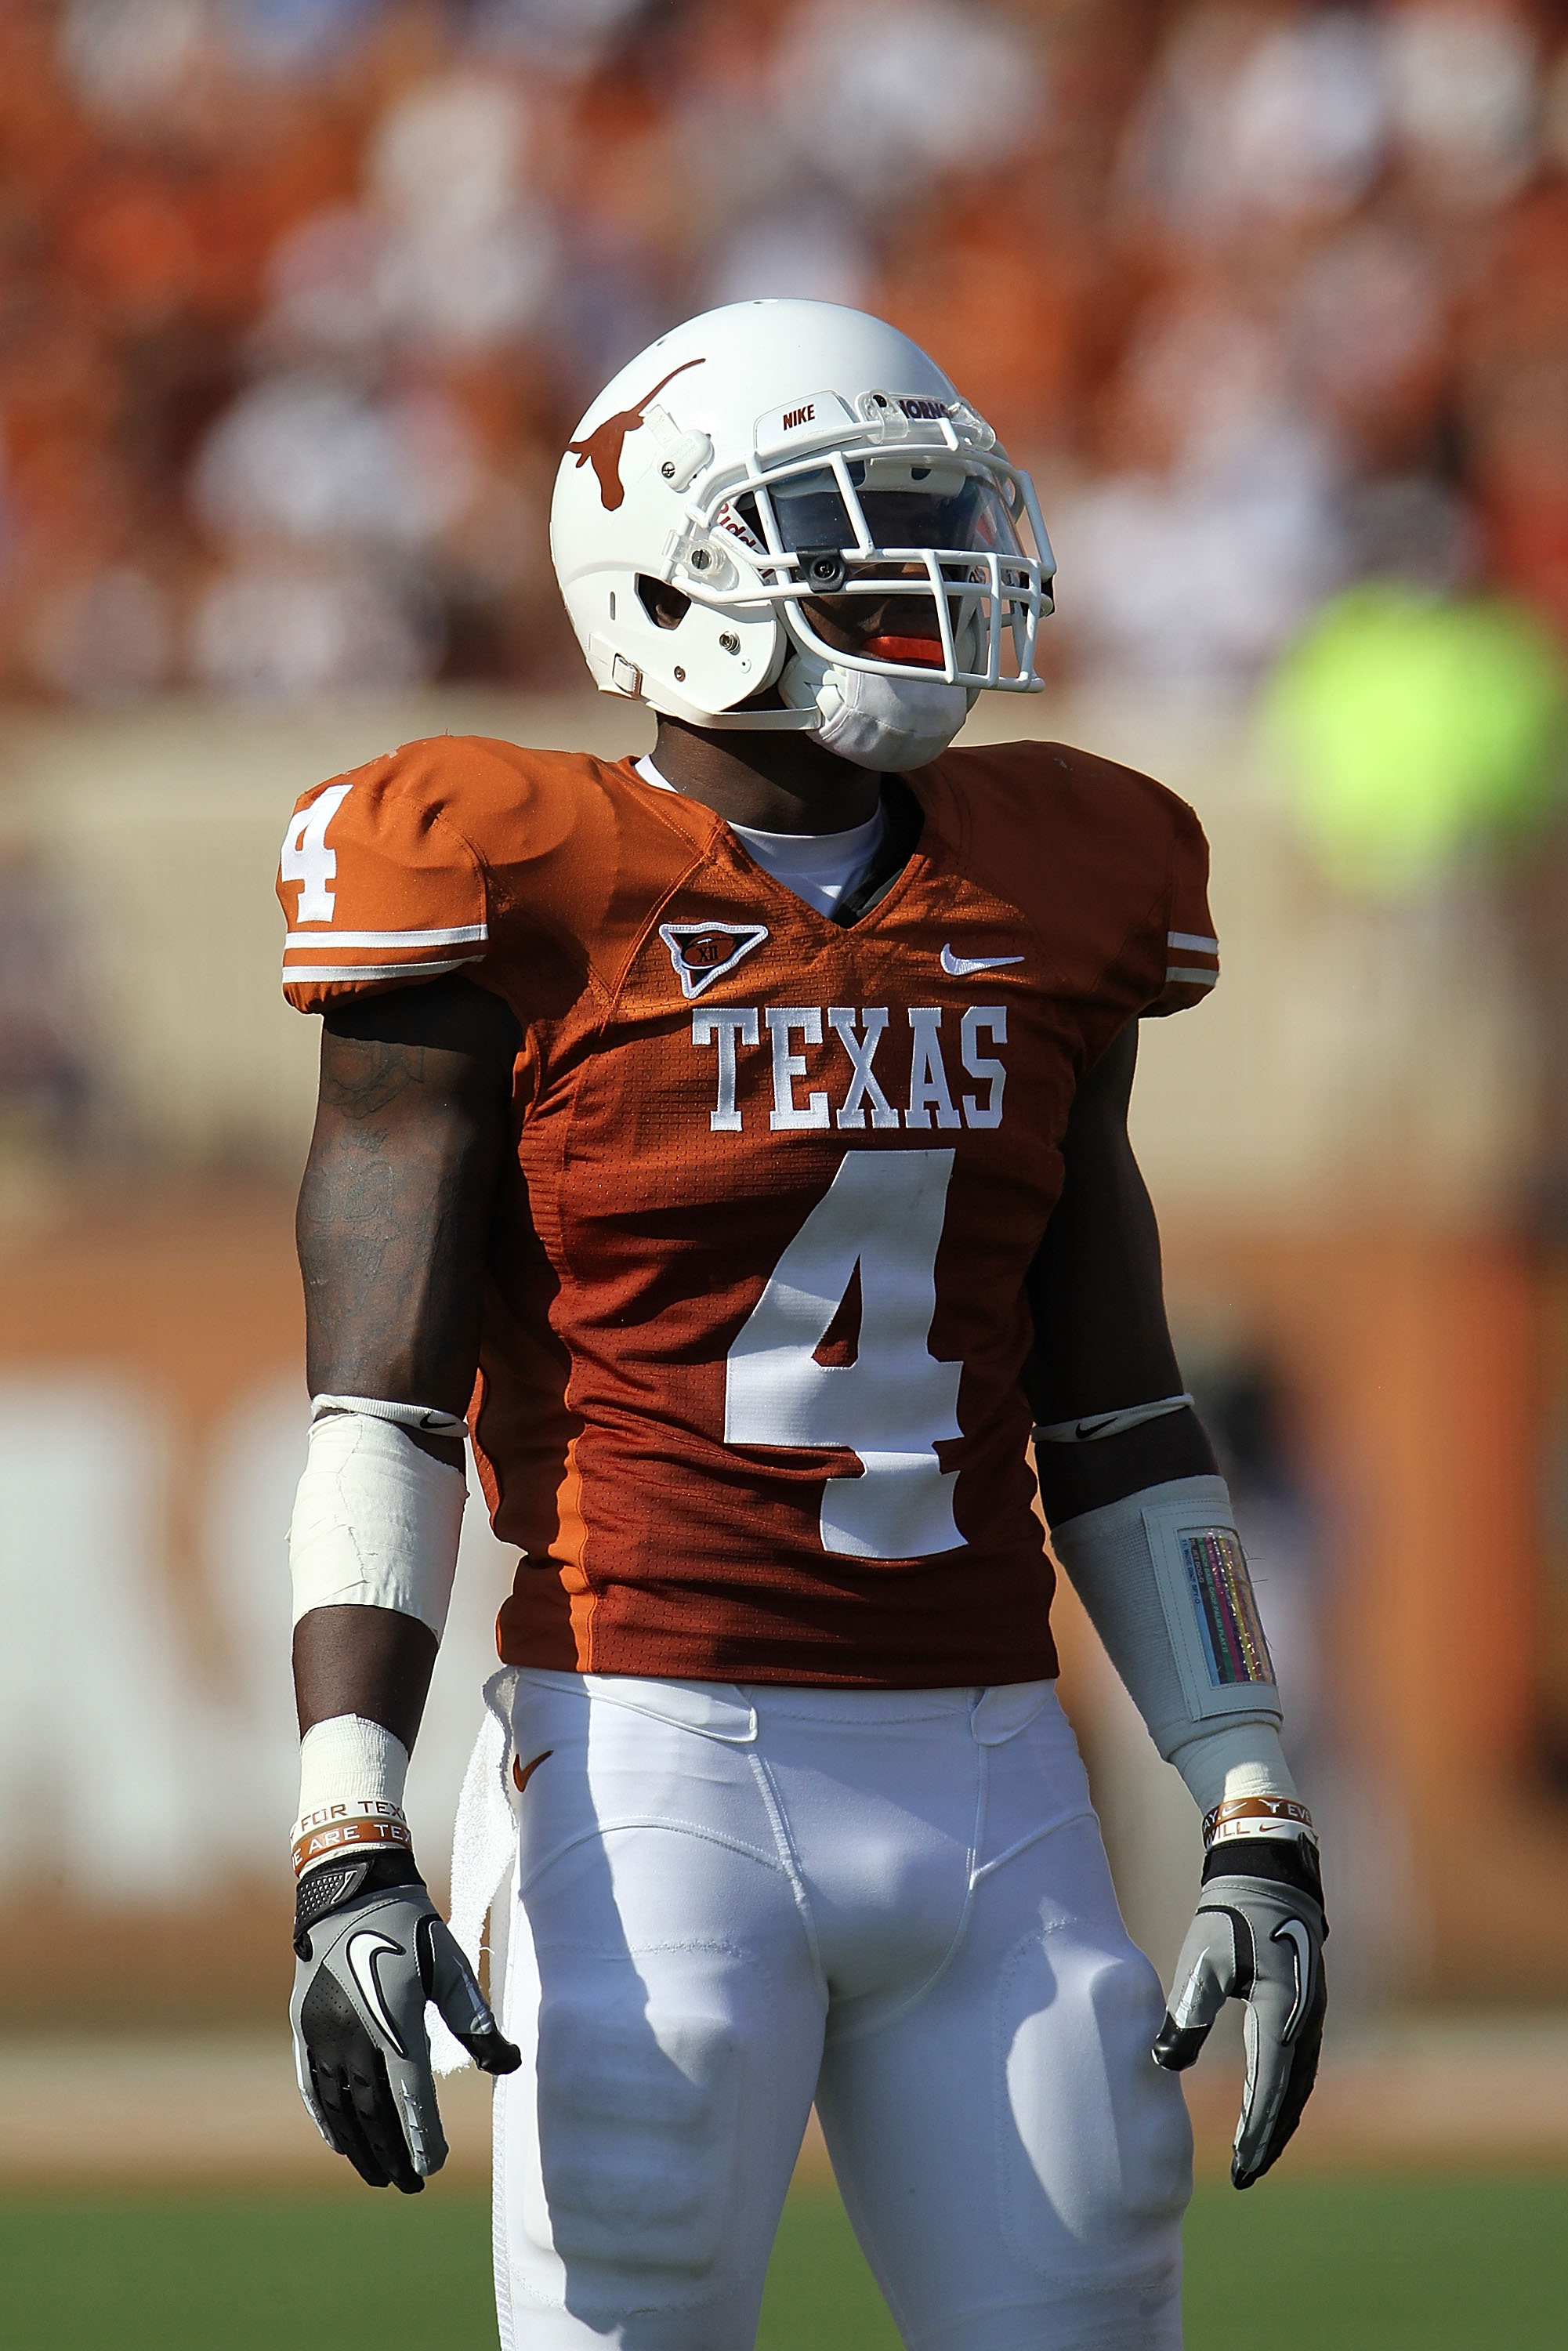 AUSTIN, TX - SEPTEMBER 25:  Cornerback Aaron Williams #4 of the Texas Longhorns at Darrell K Royal-Texas Memorial Stadium on September 25, 2010 in Austin, Texas.  (Photo by Ronald Martinez/Getty Images)